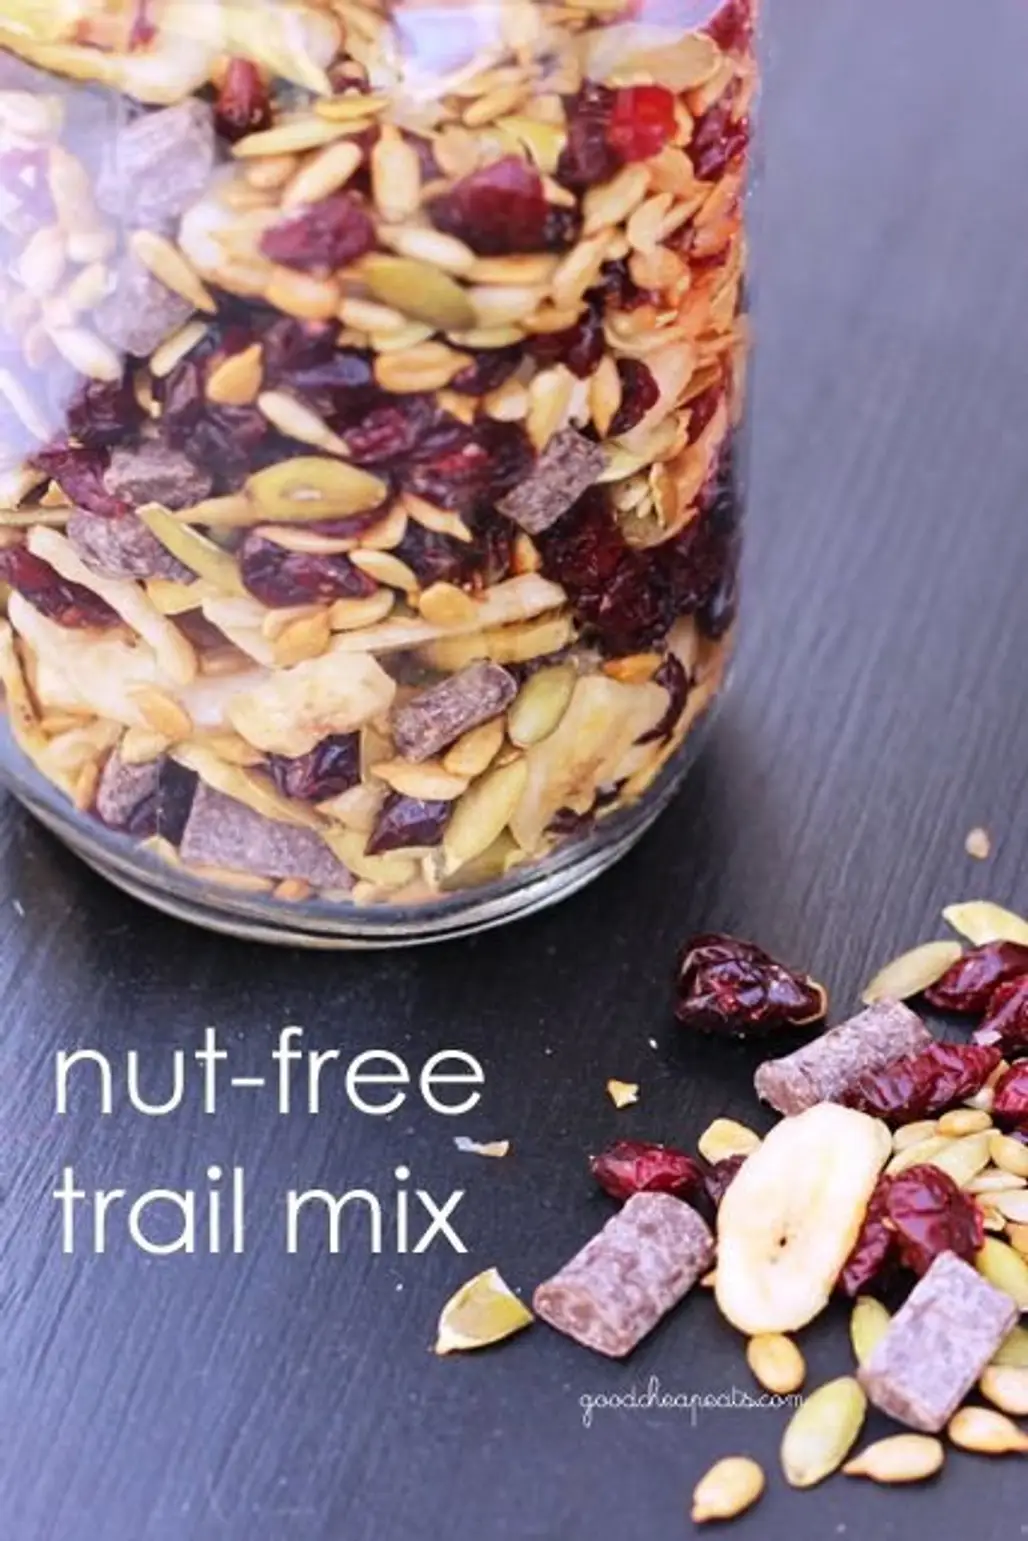 Another Nut Free Trail Mix